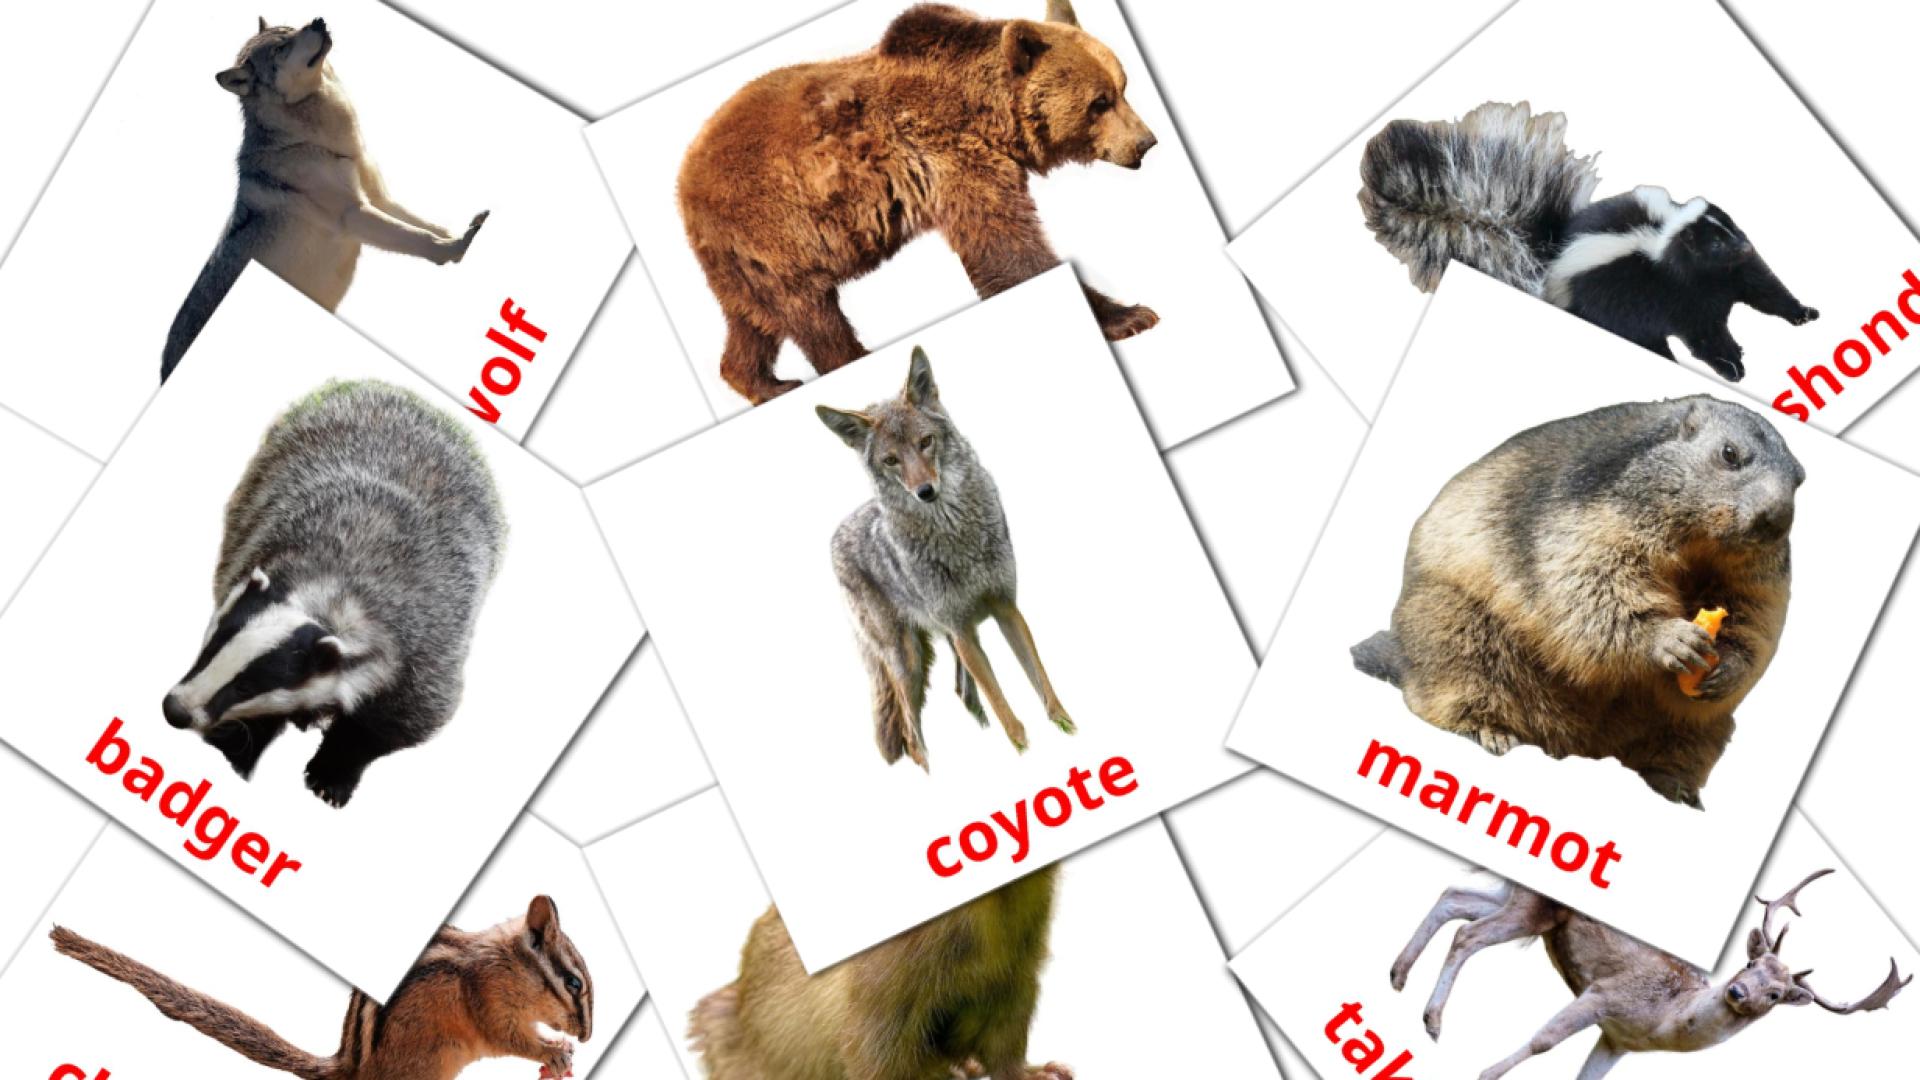 Forest animals - afrikaans vocabulary cards